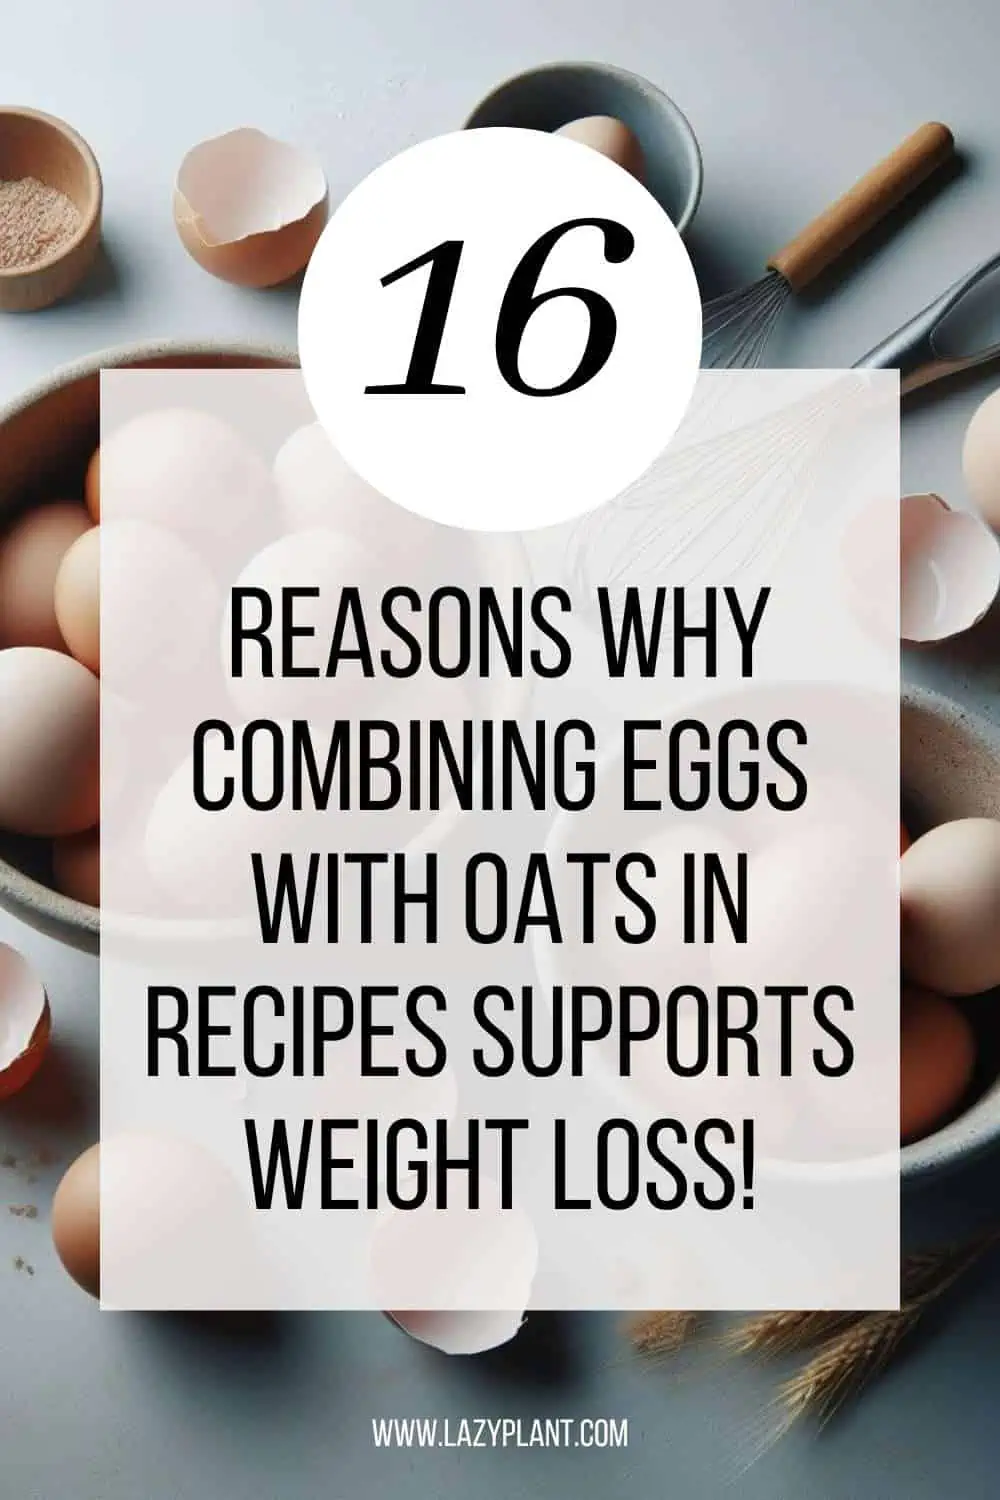 Diet tips | Recipes with Eggs & Oats support Weight Loss!